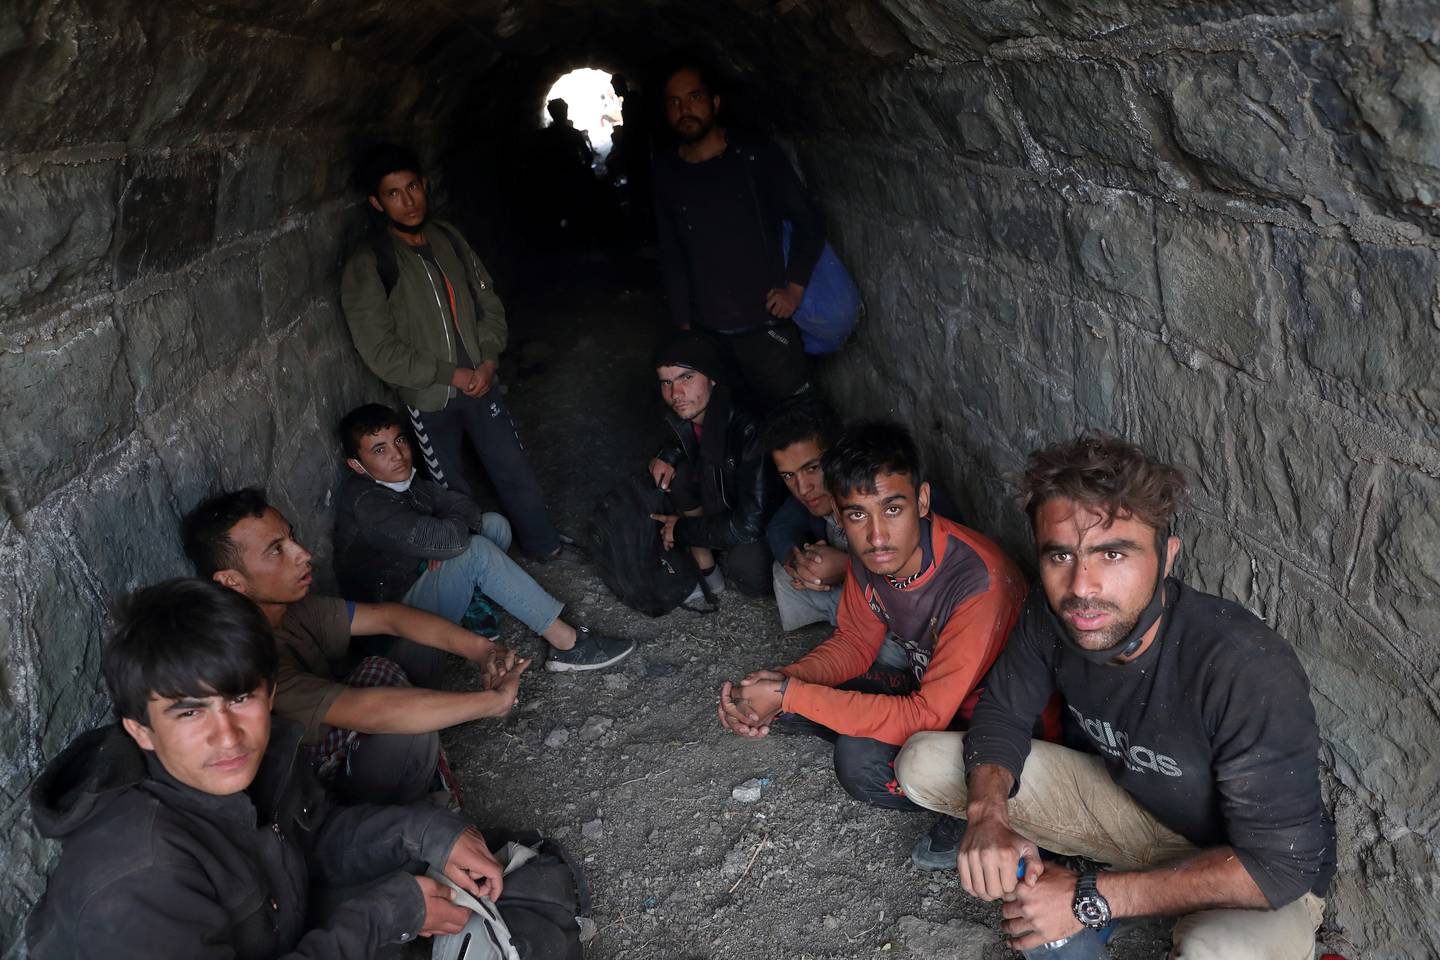 Afghan migrants hide from security forces in a tunnel near Tatvan in Bitlis province on August 23, after crossing illegally into Turkey from Iran. Reuters